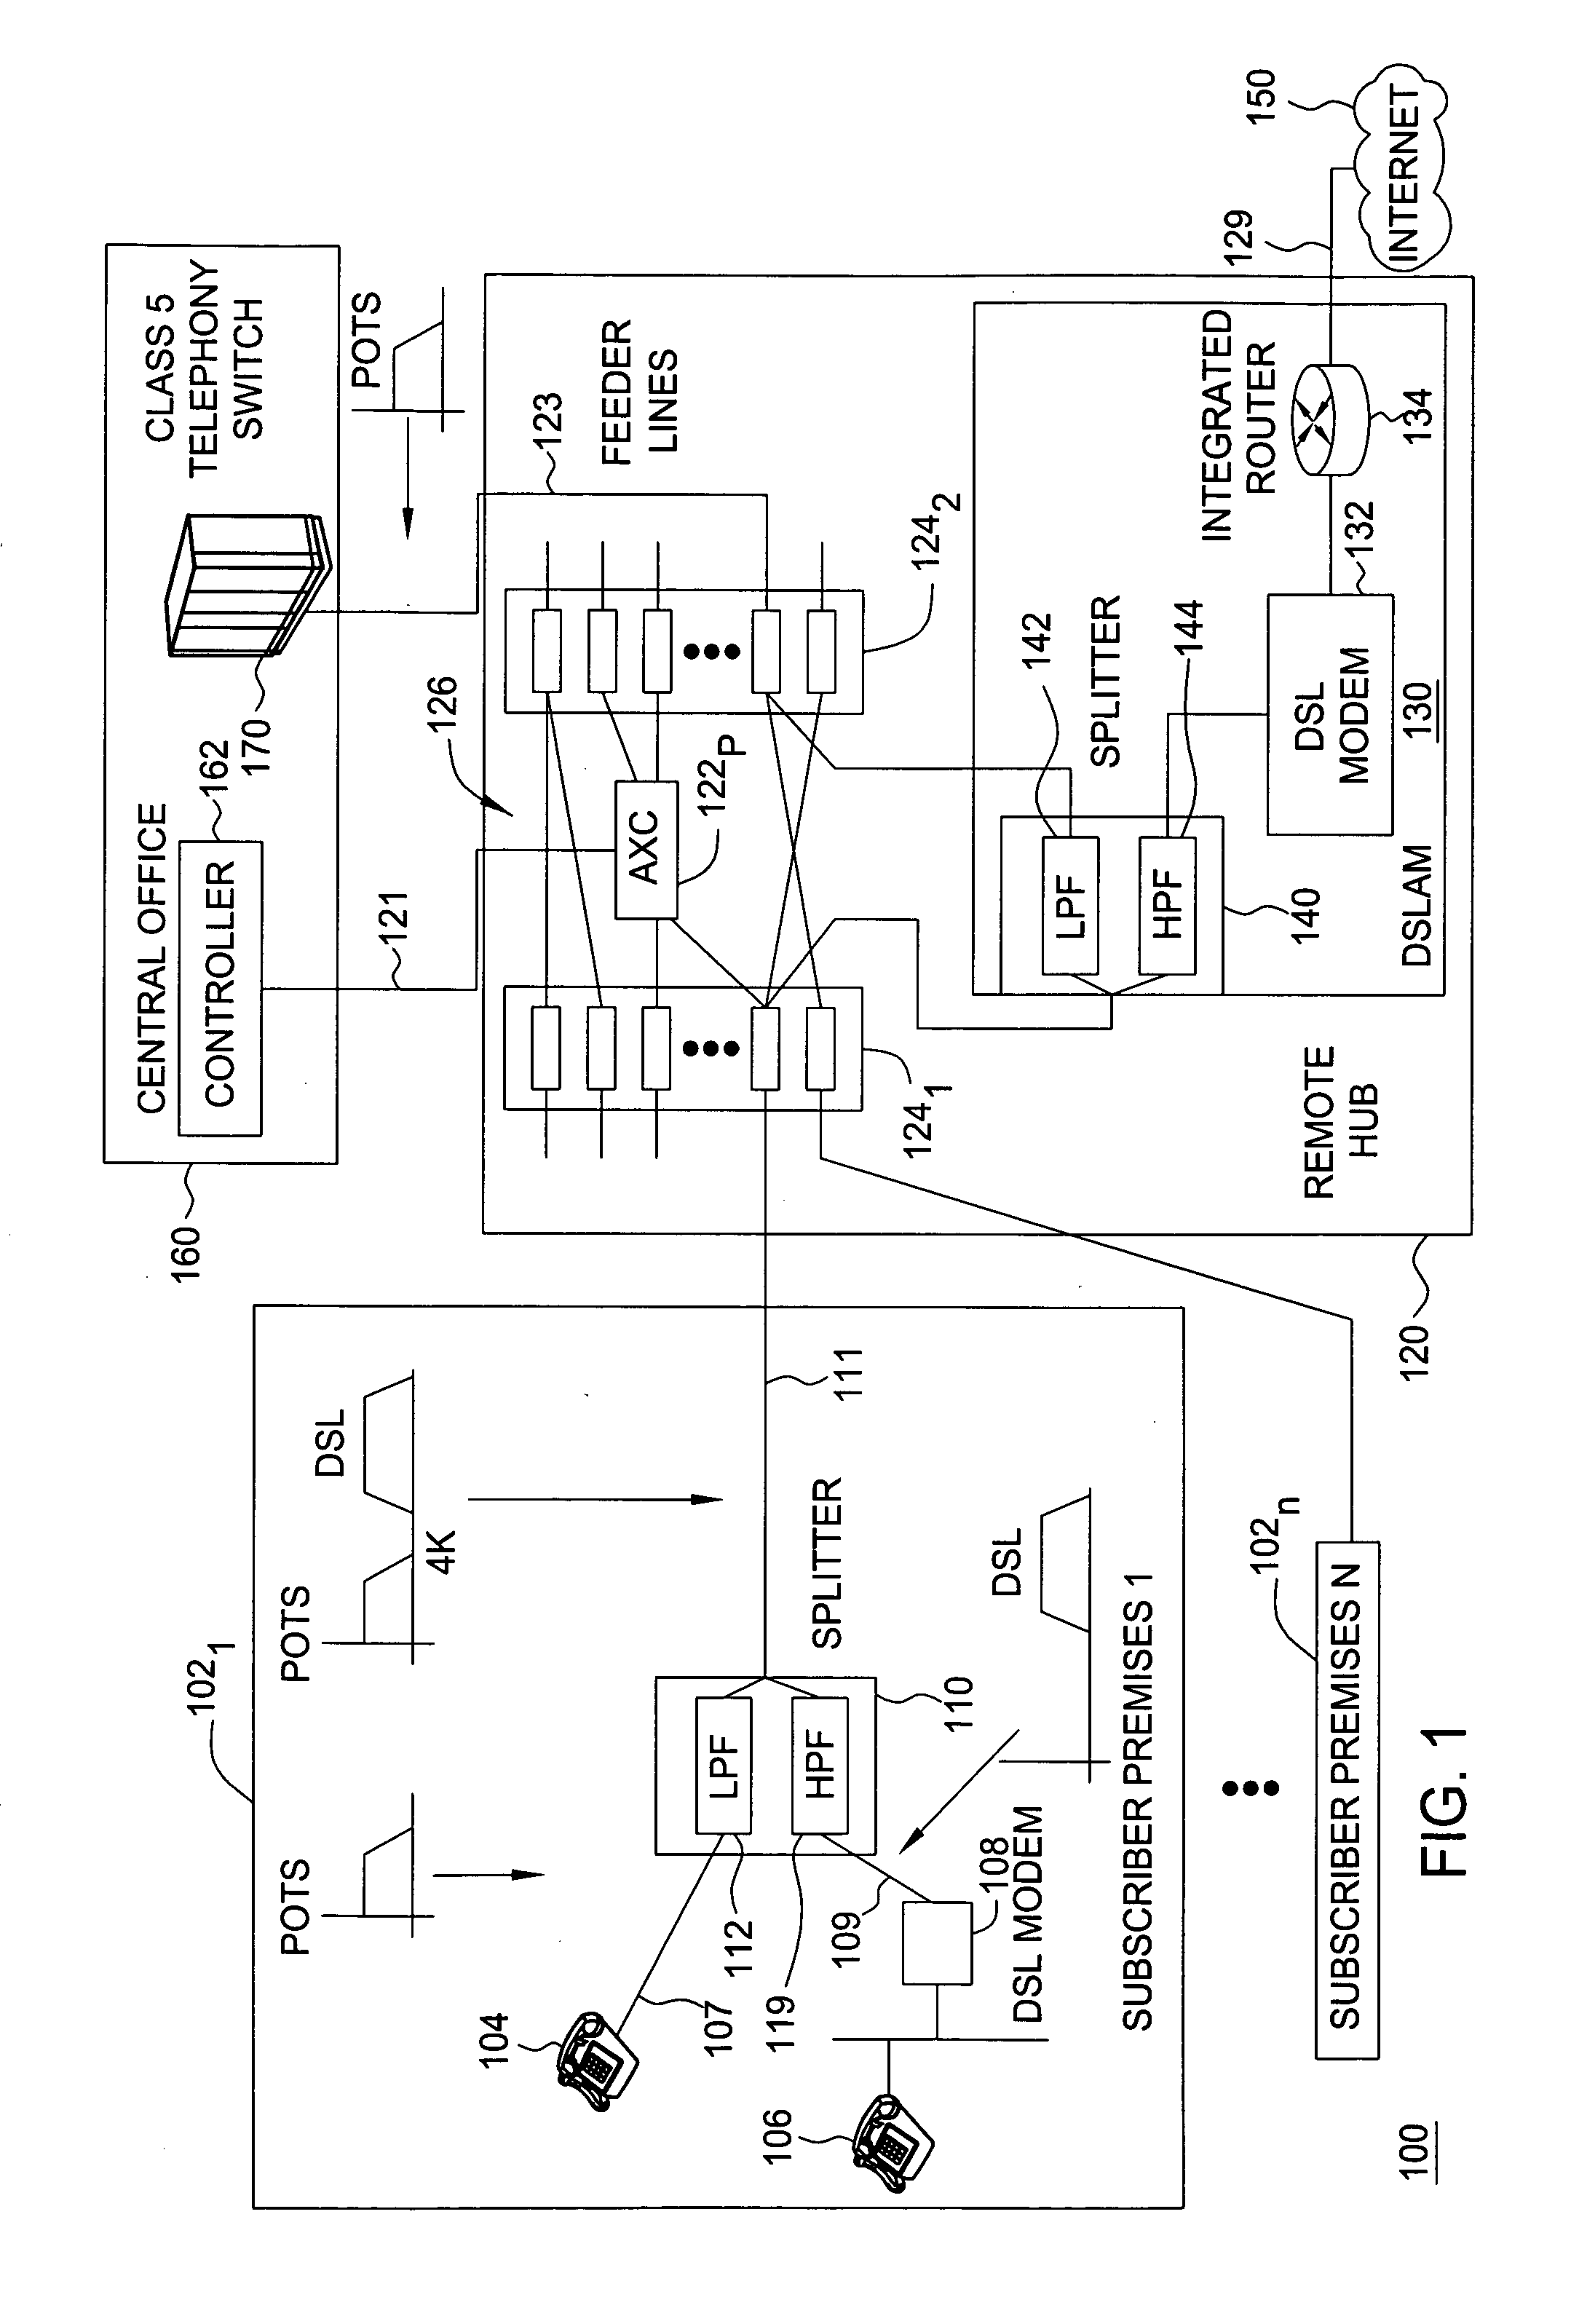 Method and apparatus for configuring an automatic cross connect system at a remote wiring hub